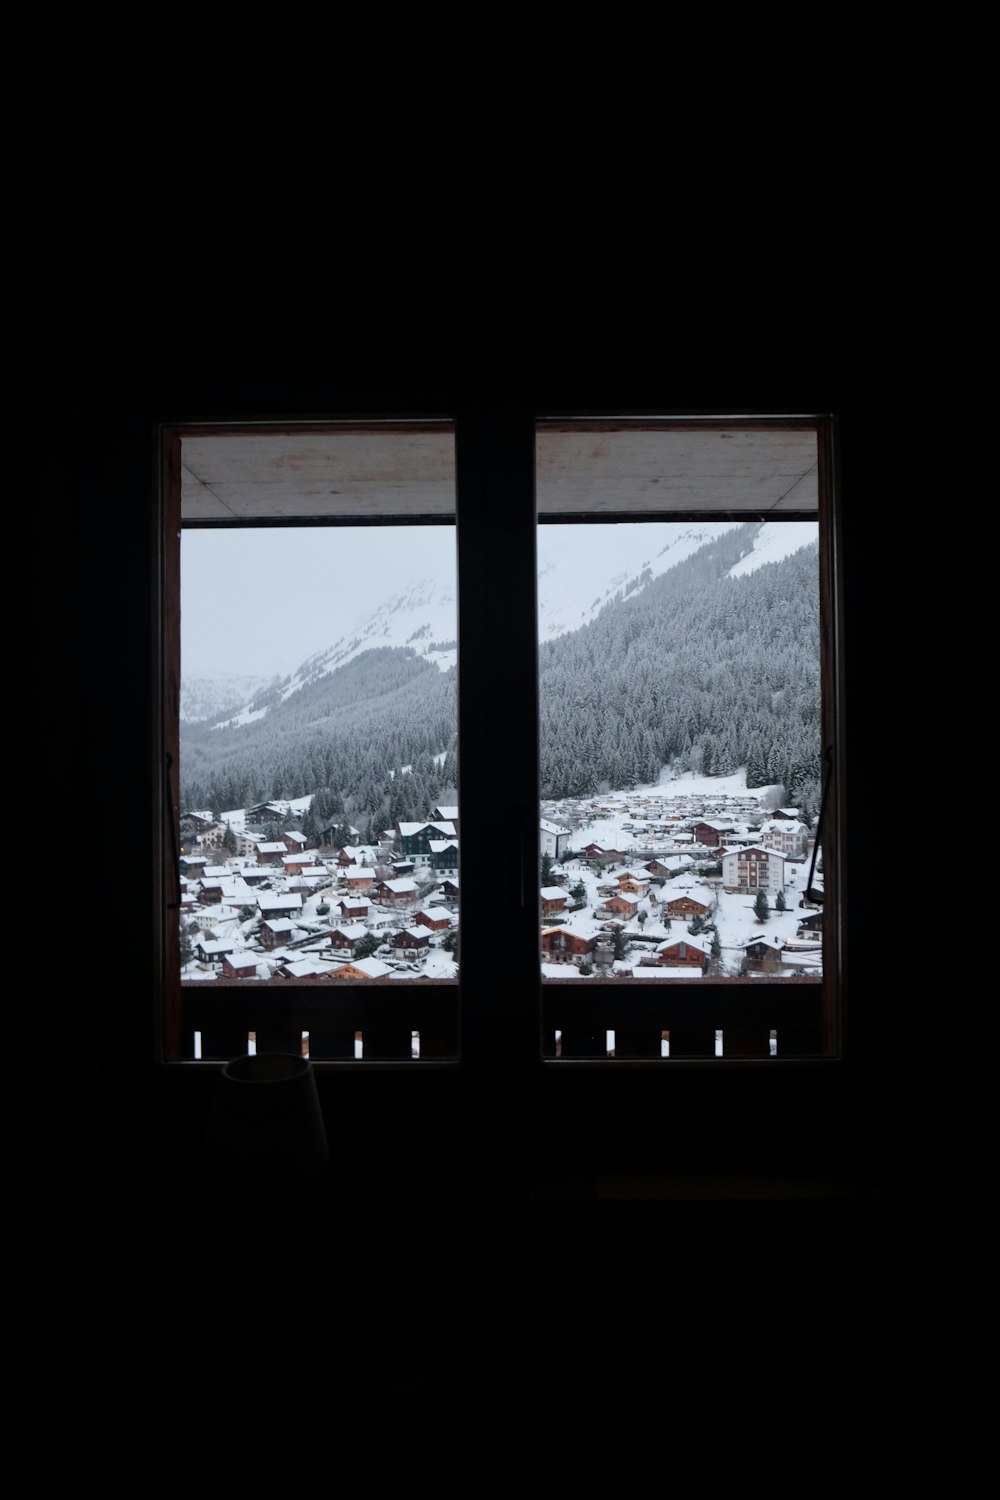 a view out a window of a snowy town